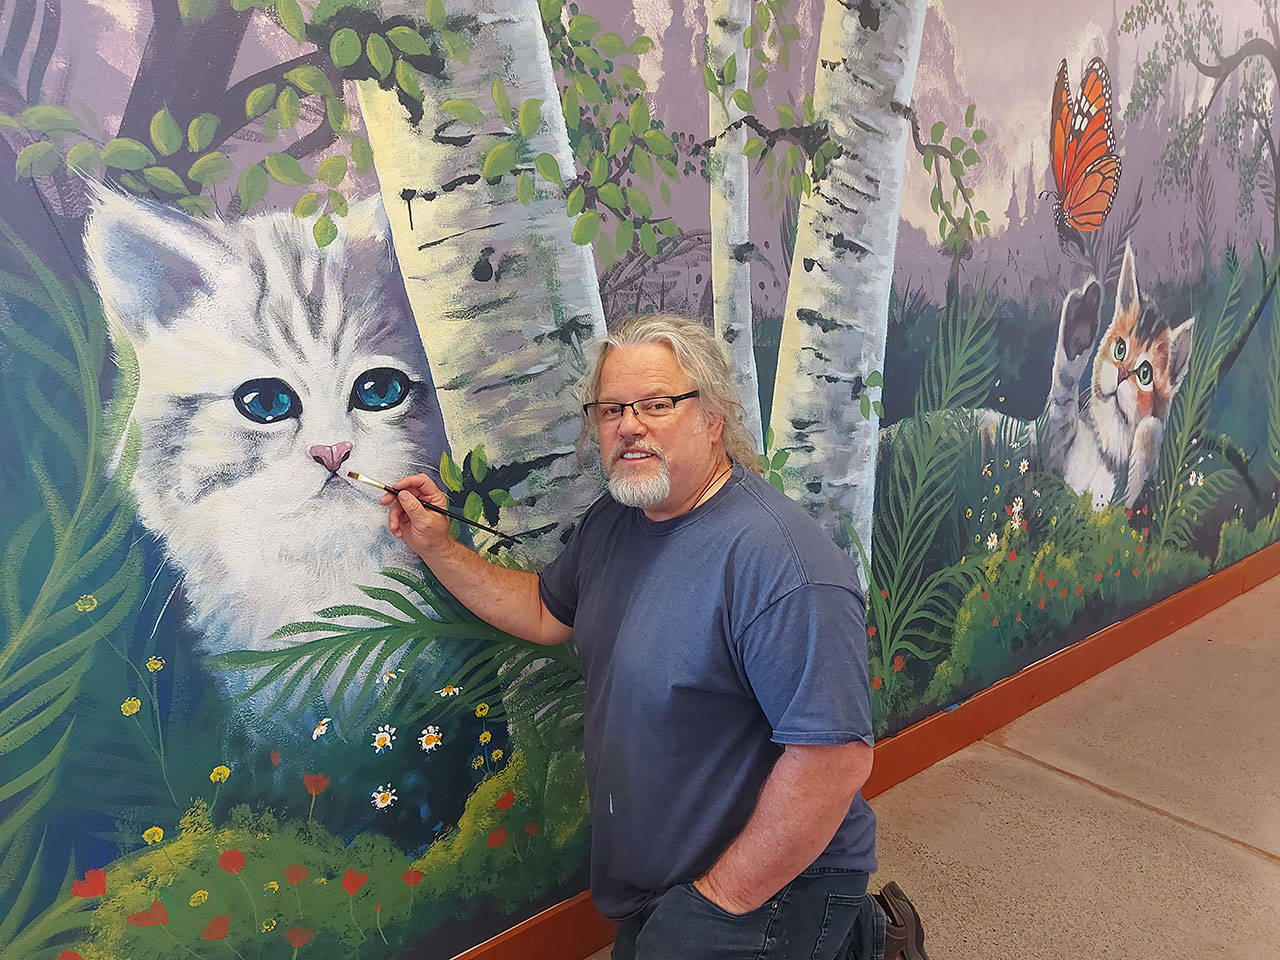 Port Angeles artist Dave Montague works on a mural at the Olympic Peninsula Humane Society’s McKay Kitty City near Sequim. “When I heard about the new Kitty City building, I really wanted to help,” Montague said. “I decided to offer my services to create a mural to capture the cats’ personalities that will live there until adopted. Since I am an avid hiker, I wanted to depict our furry friends in the scenes I have enjoyed through my 3,000 miles of hiking throughout the Olympic Mountains.” Photo courtesy of Olympic Peninsula Humane Society